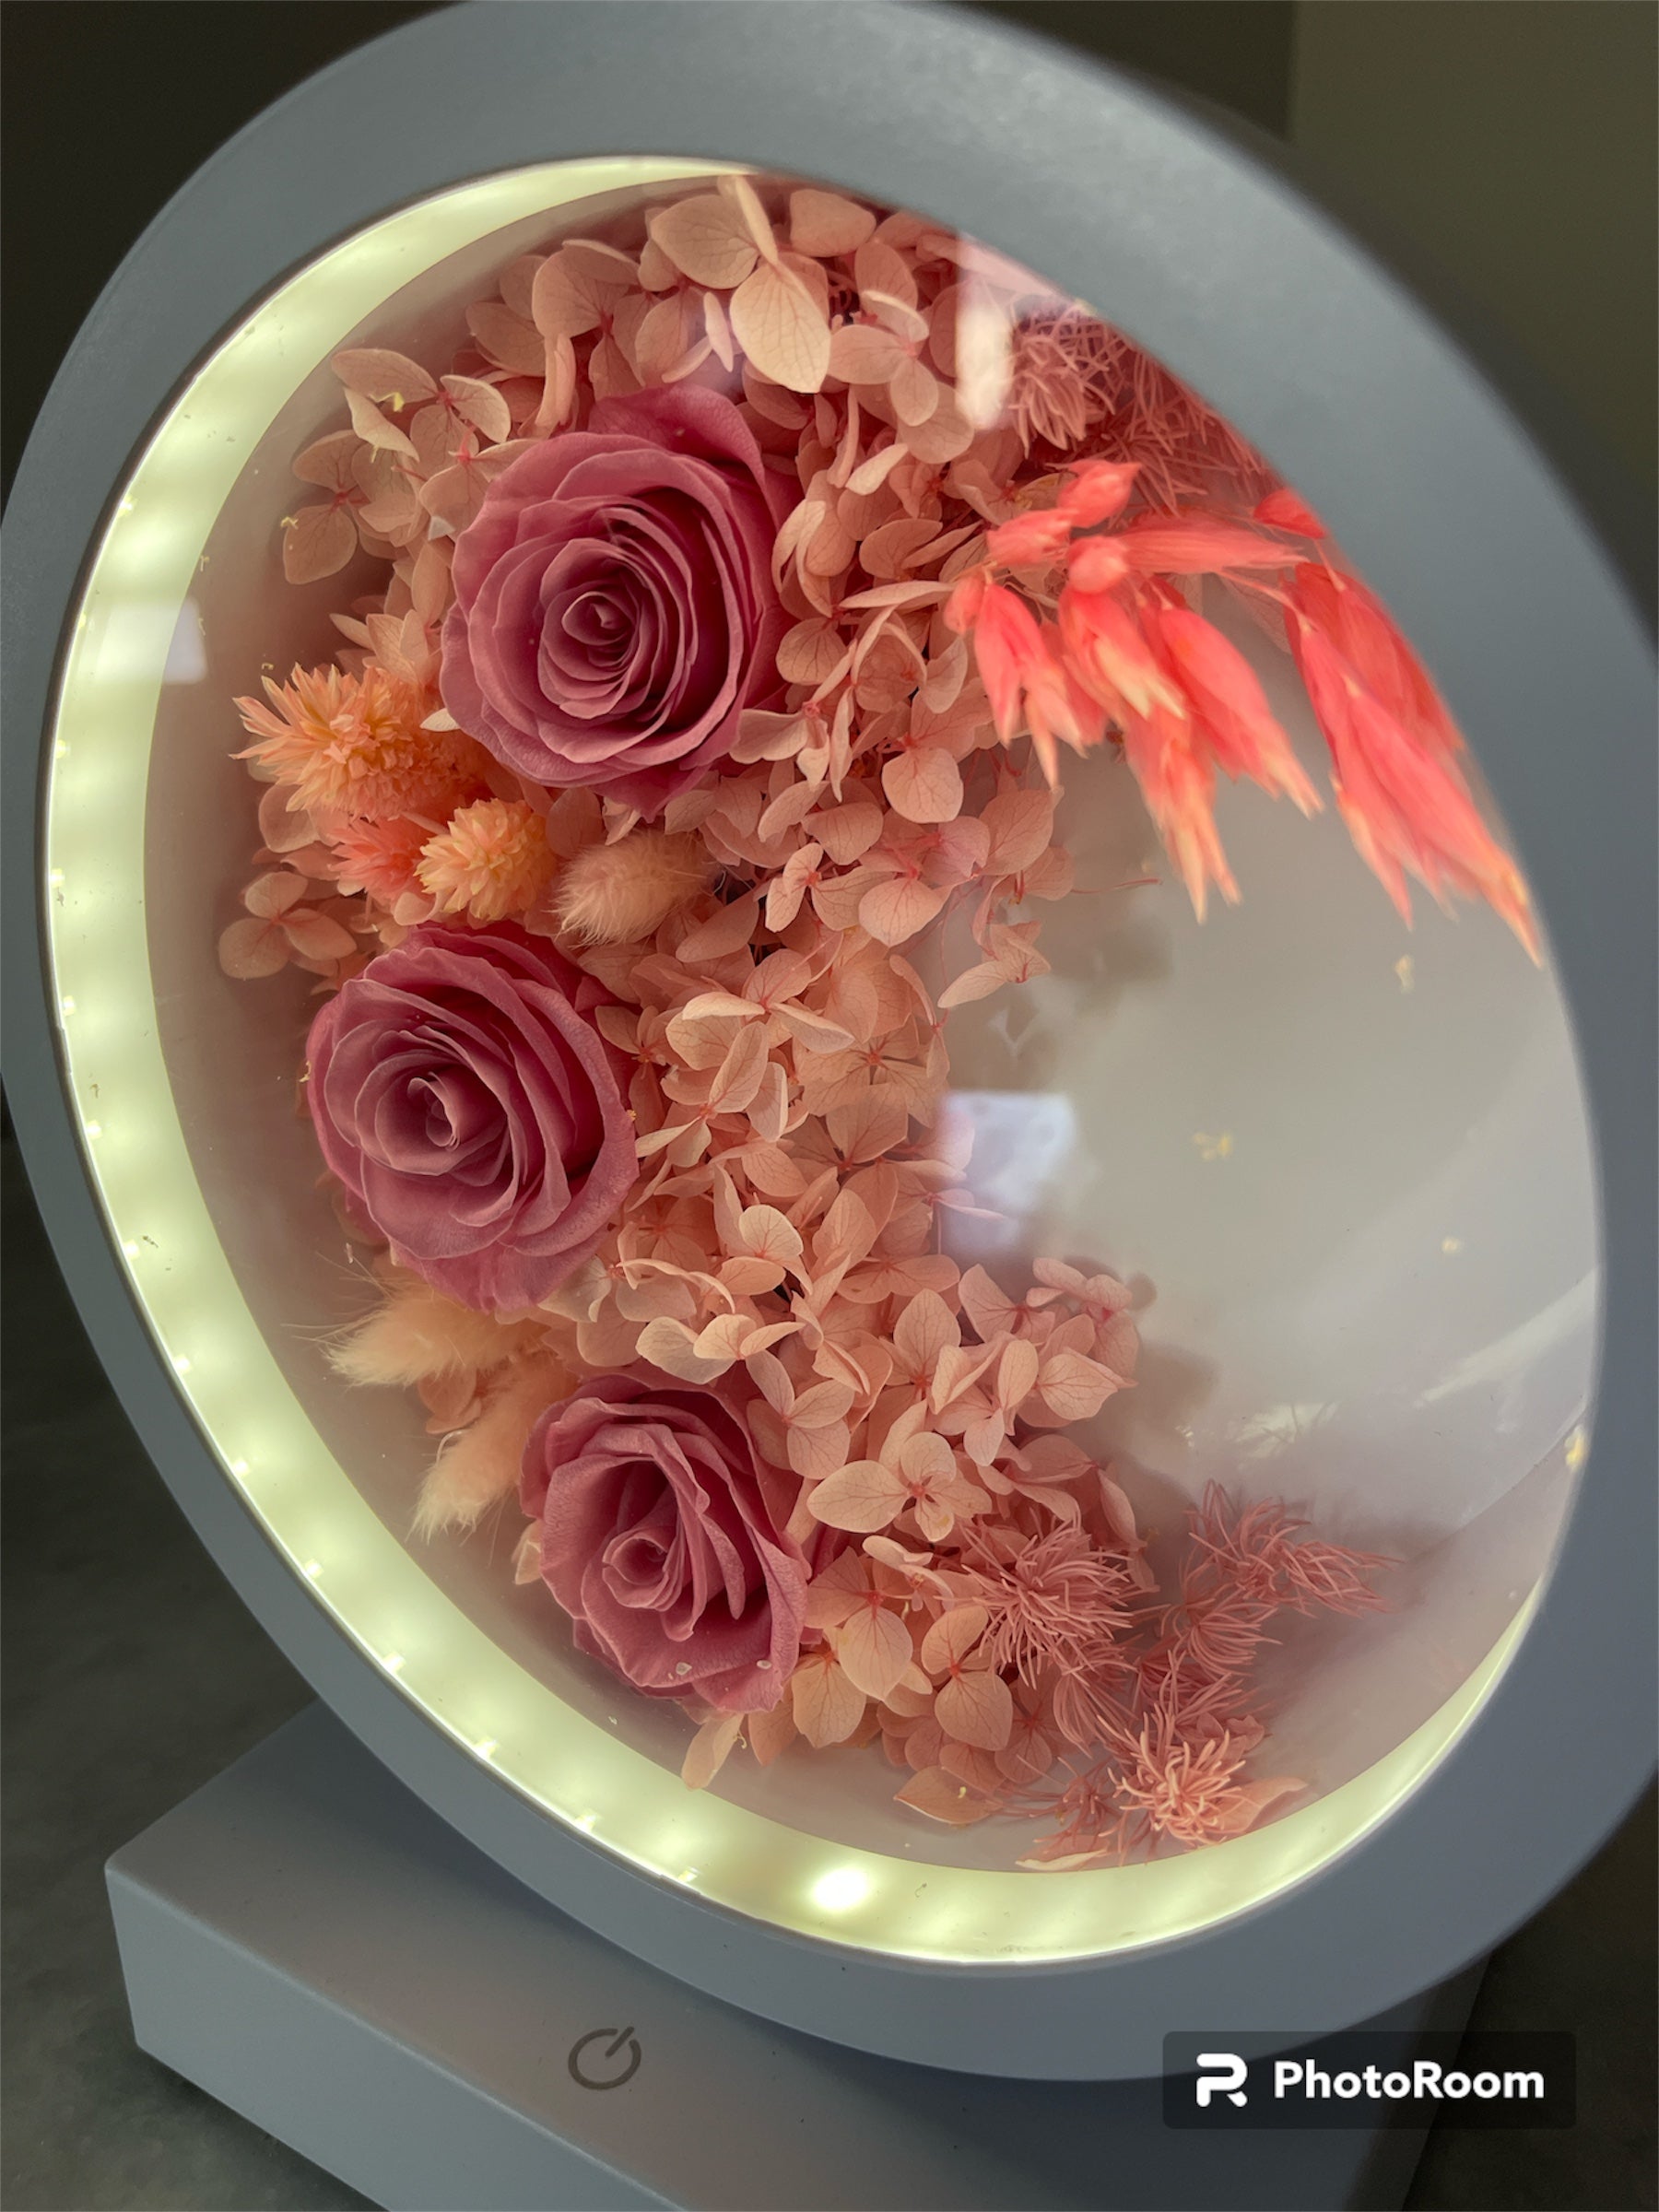 Lamps with preserved flowers